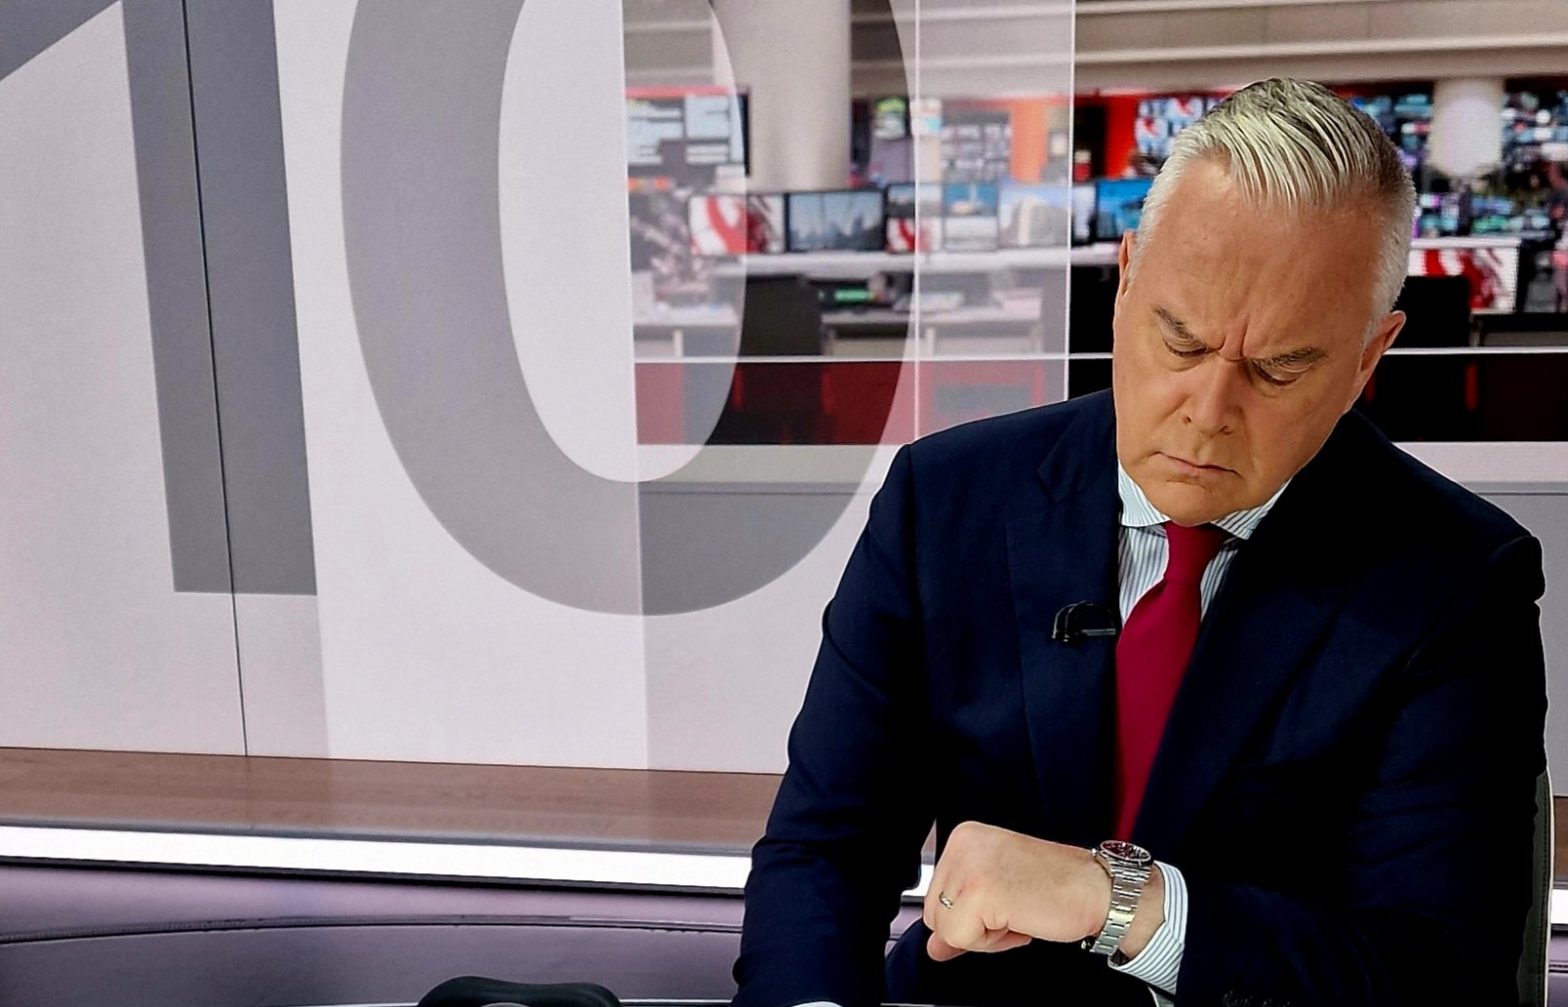 Who is BBC presenter Huw Edwards?